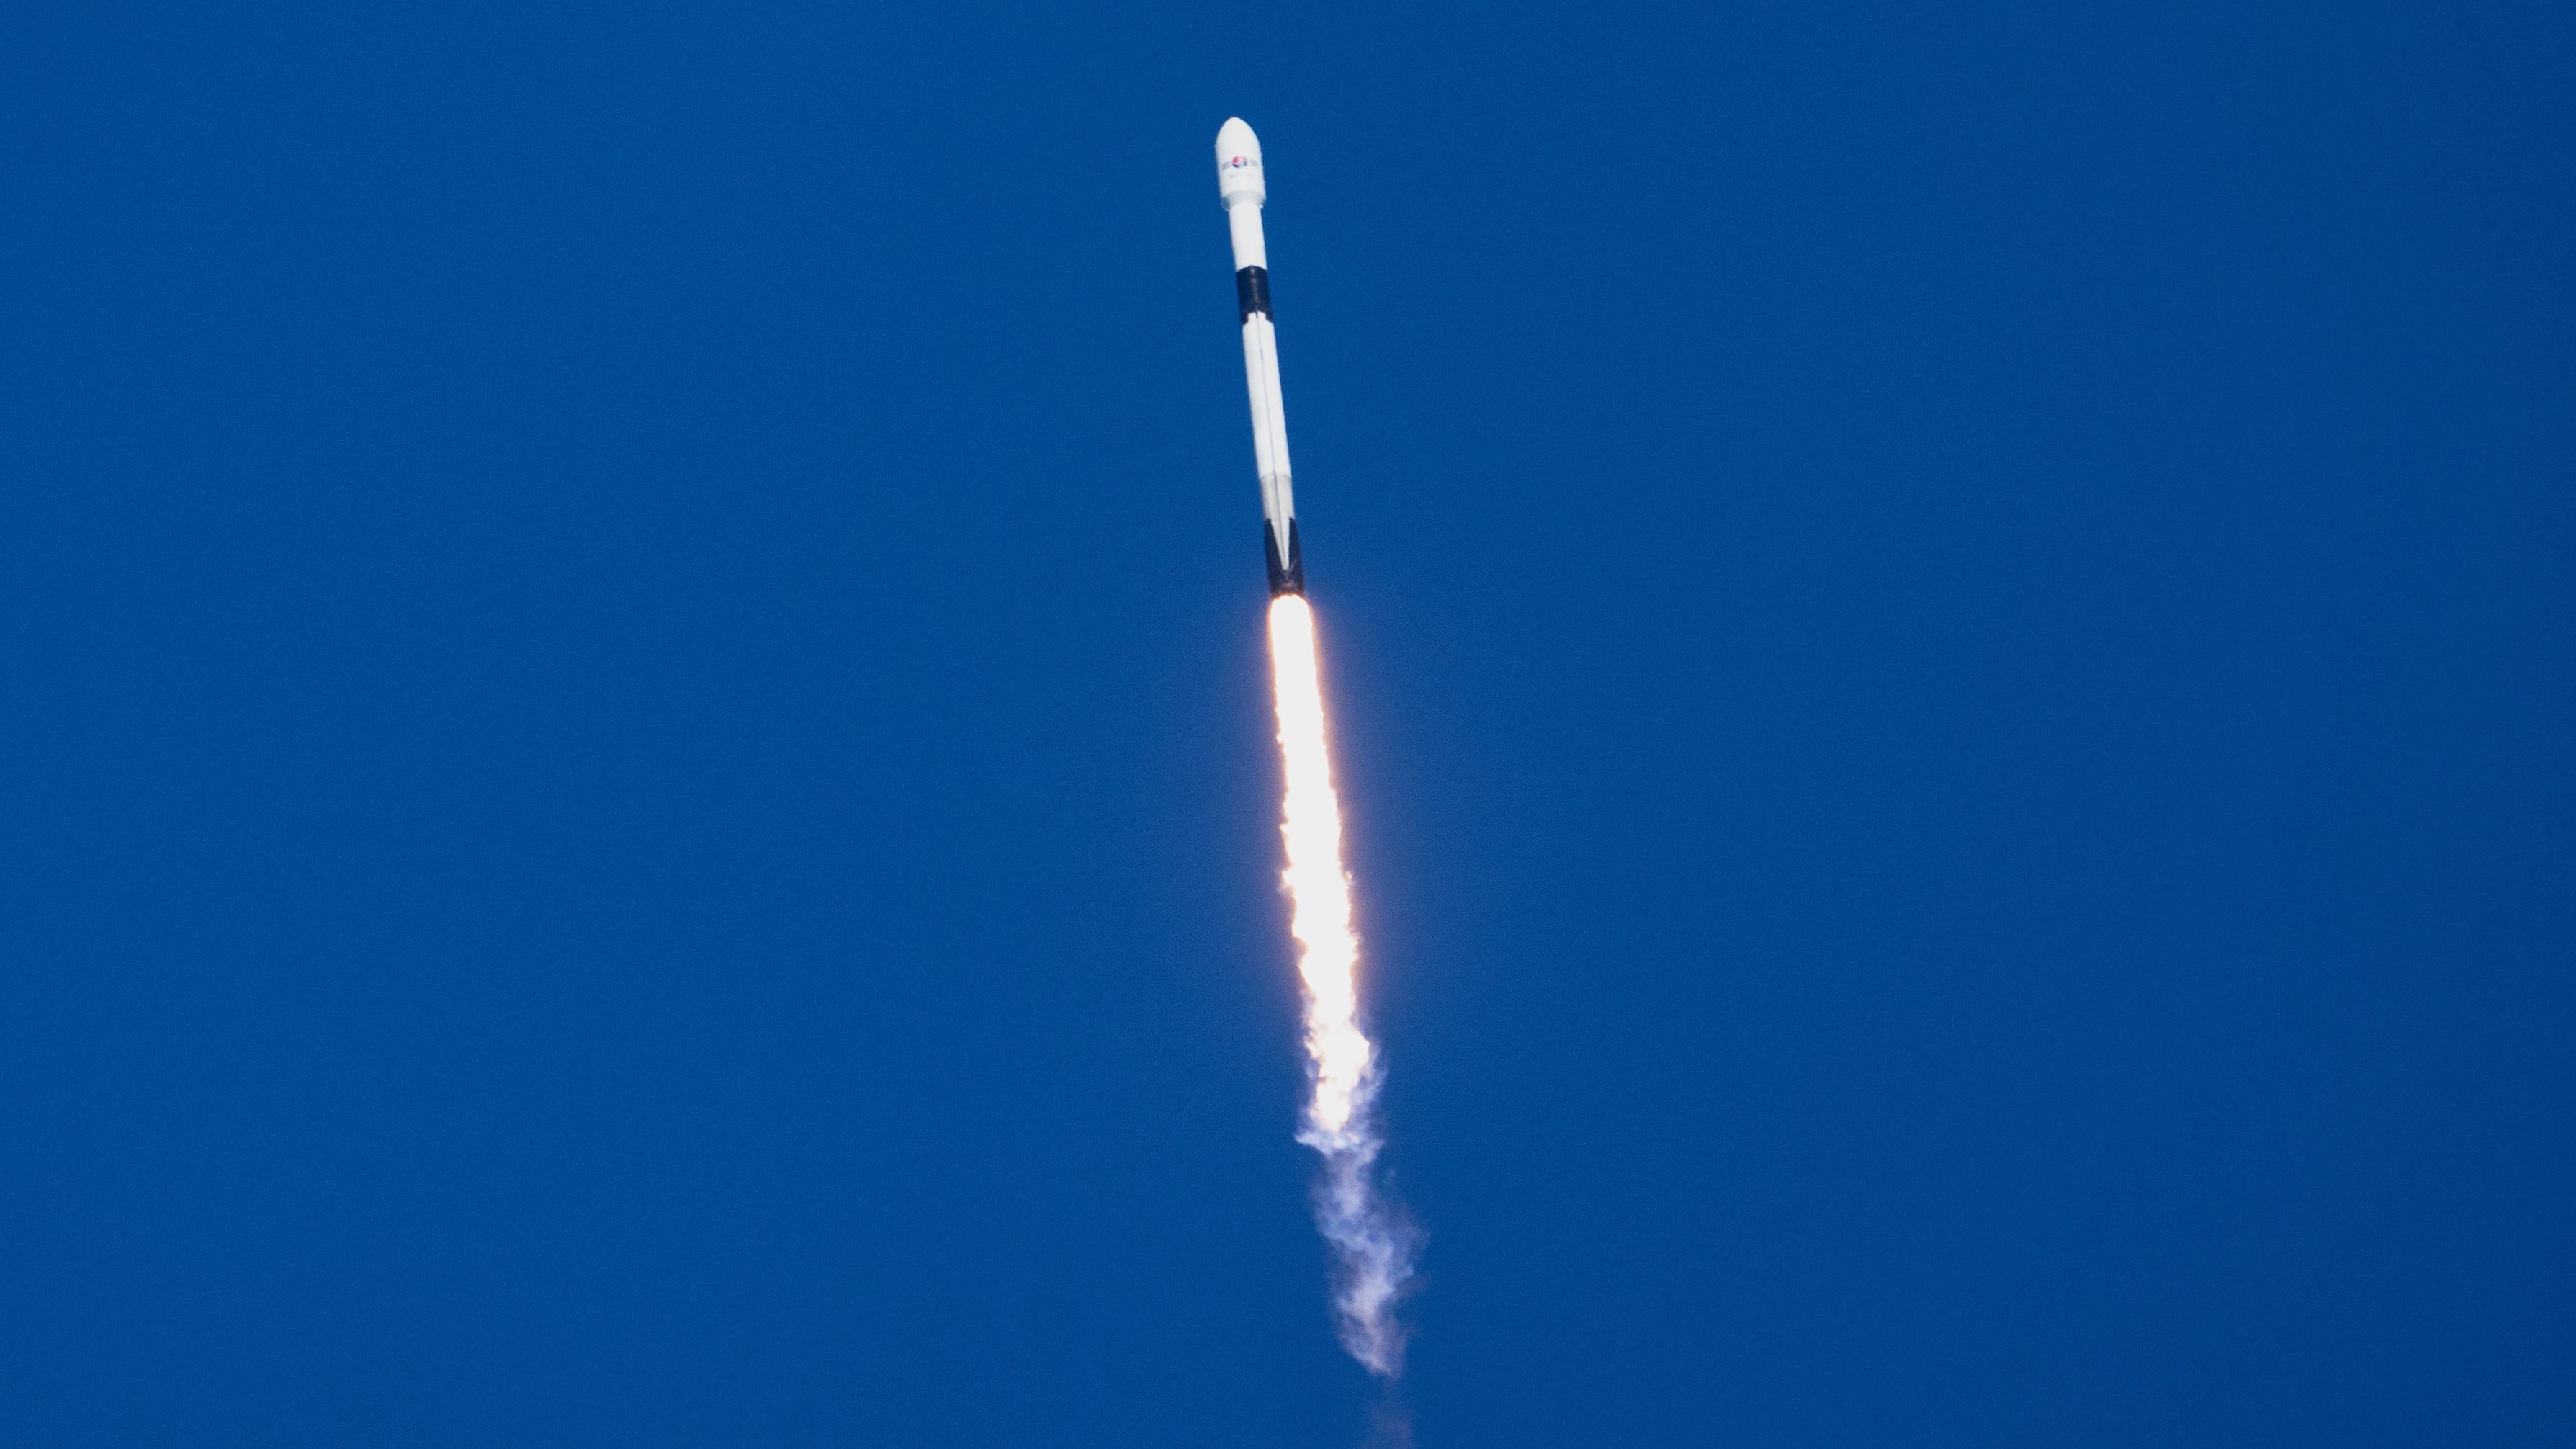 A SpaceX Falcon 9 rocket launches from Cape Canave